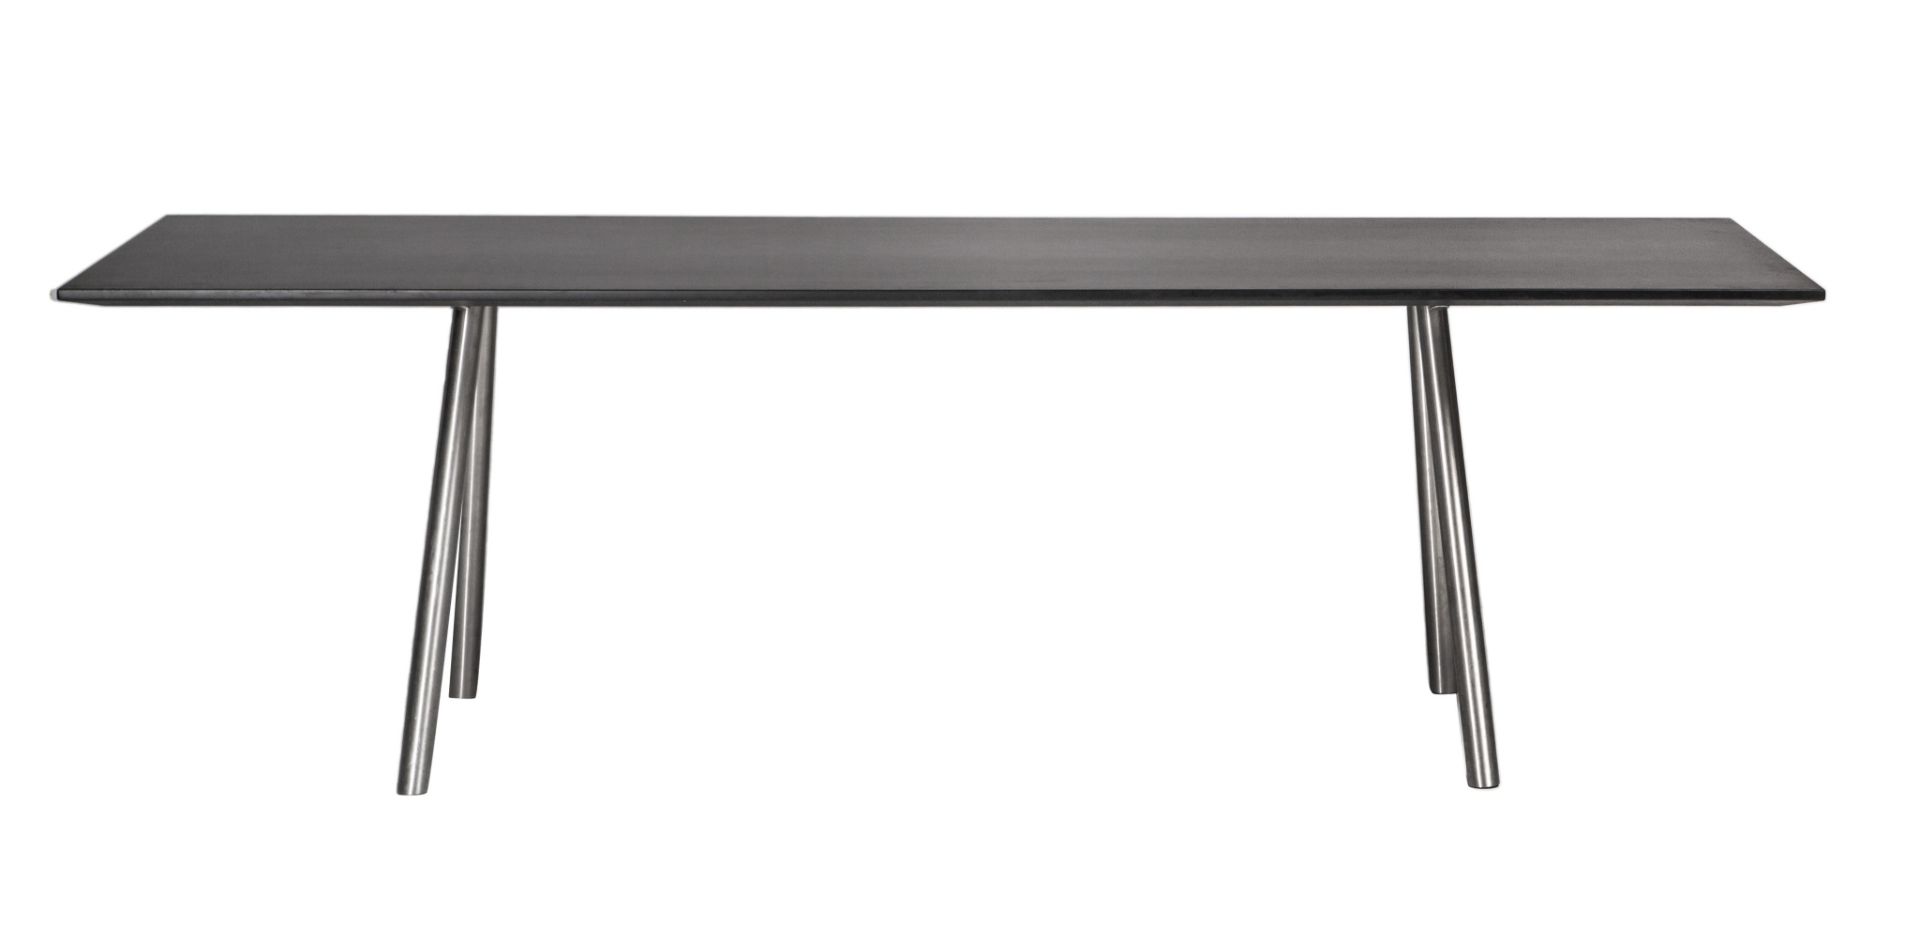 An A-Table by Maarten van Severen for Vitra, H 72,5 - W 240 - D 90 cm - Image 6 of 22